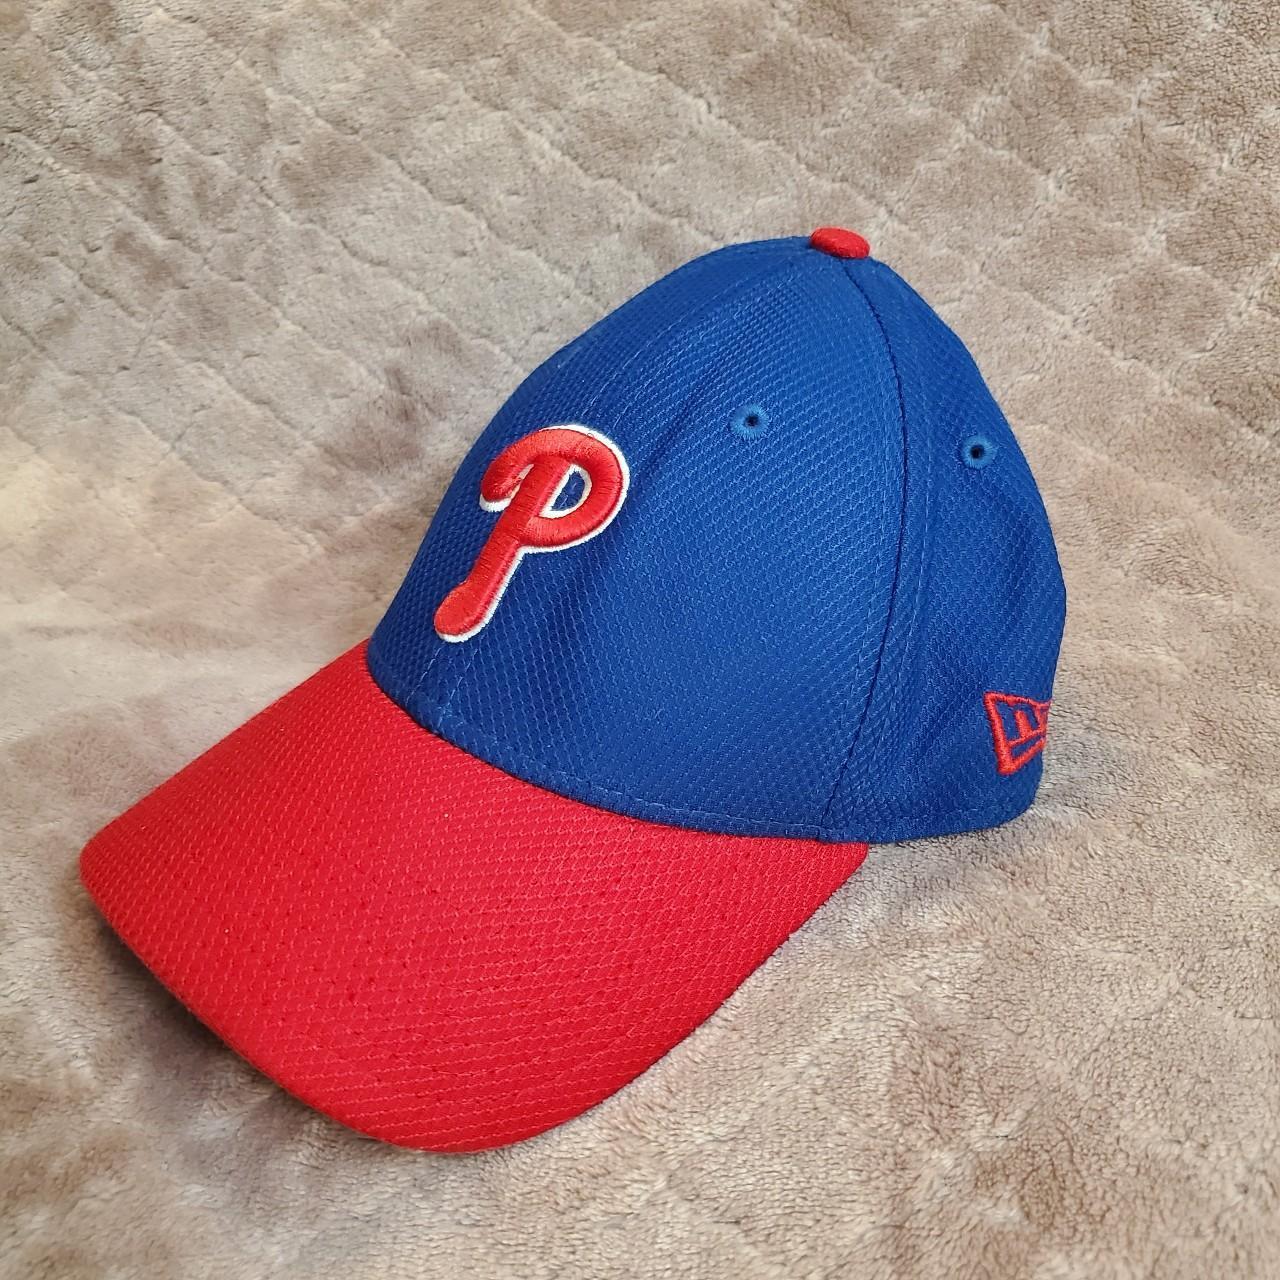 Two Toned Phillies Fitted Hat 7 3/8 Custom made - Depop